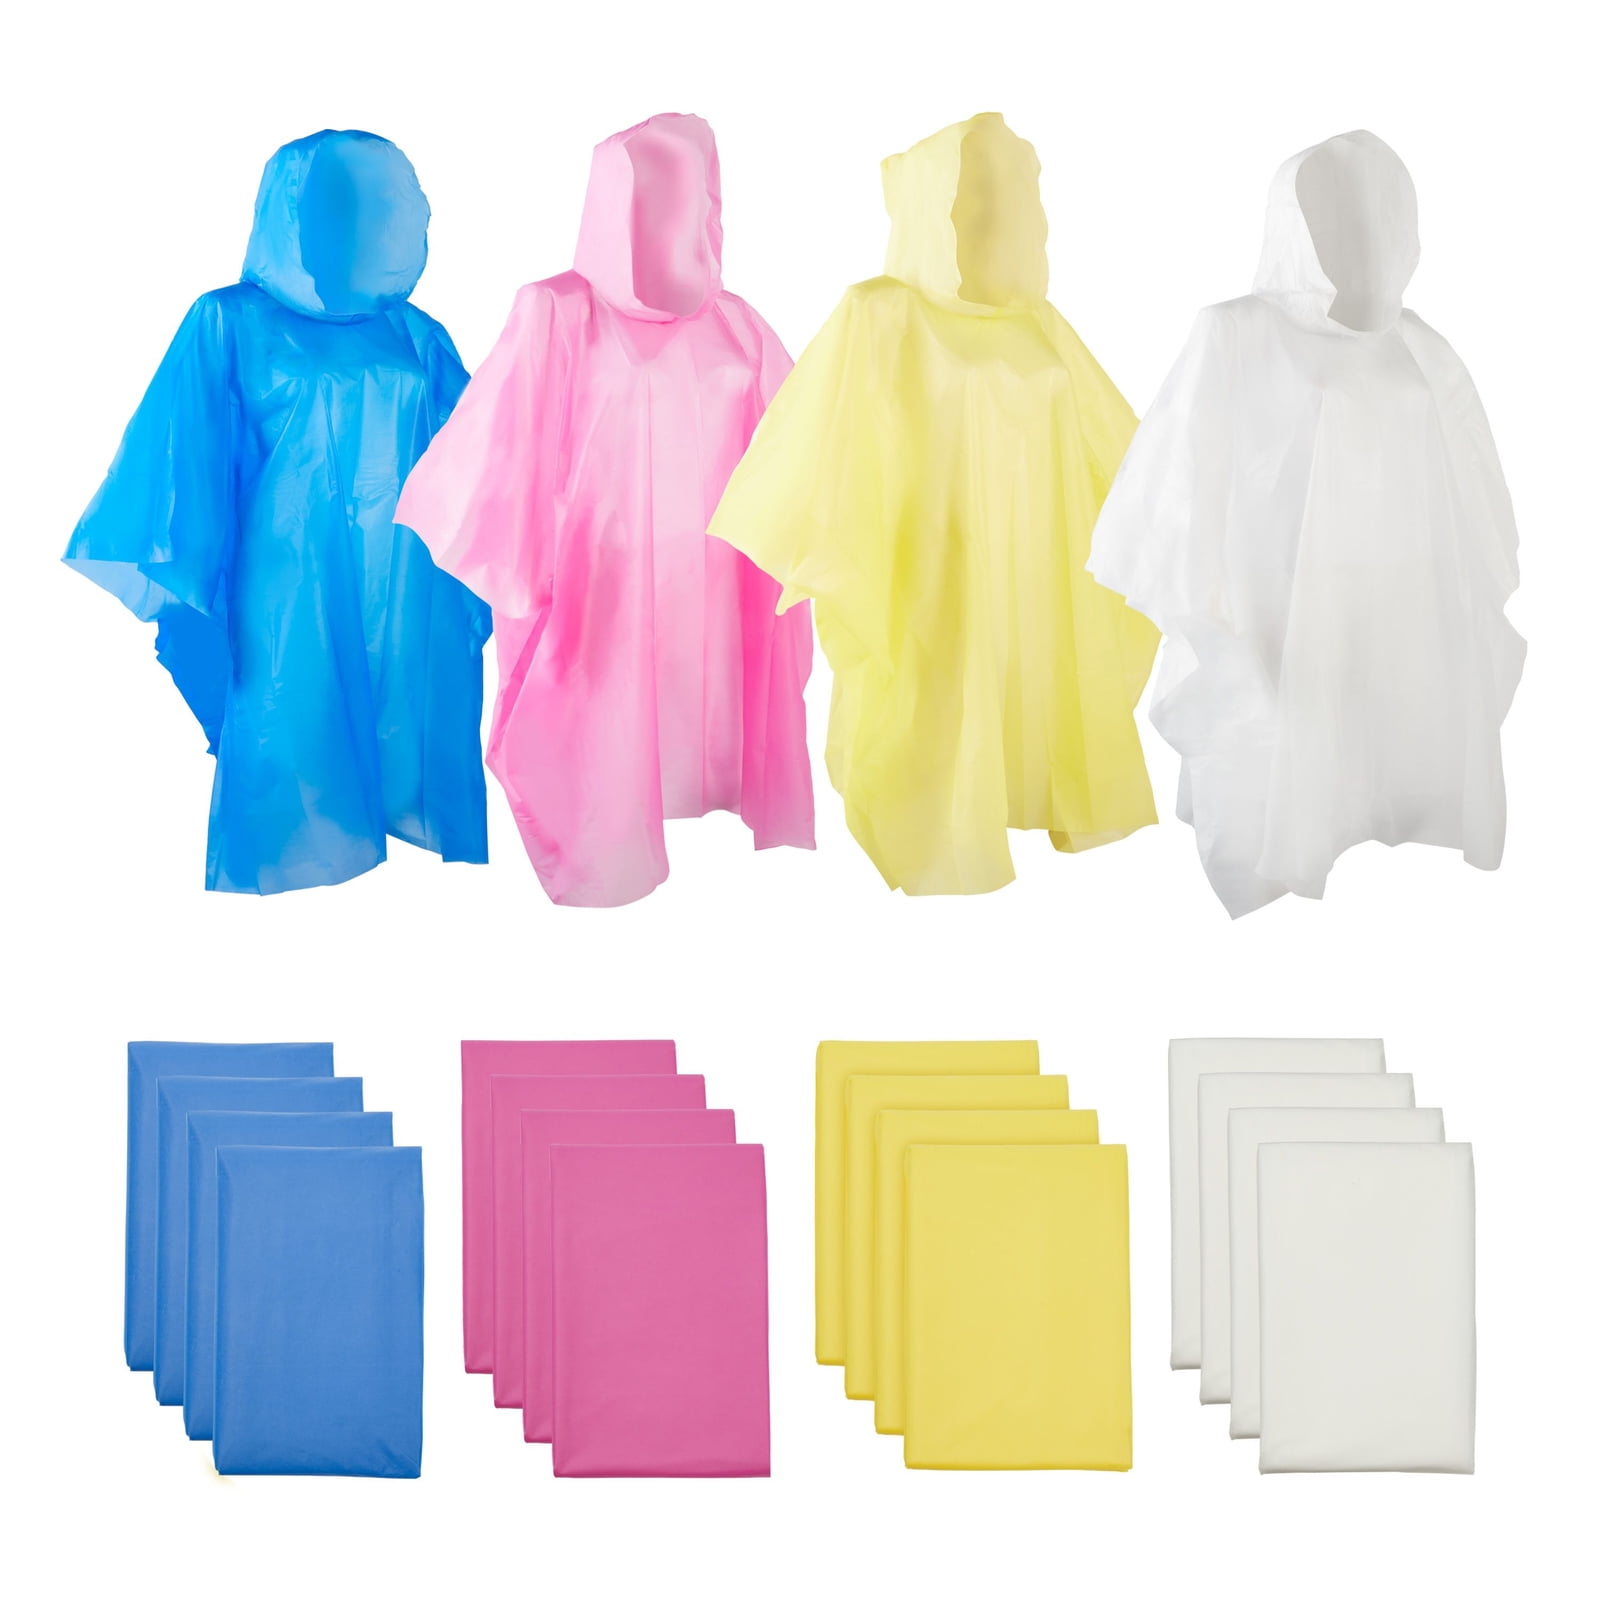 2 x Disposable Emergency Poncho Transparent/Clear Adult Raincoat 100% Brand New 